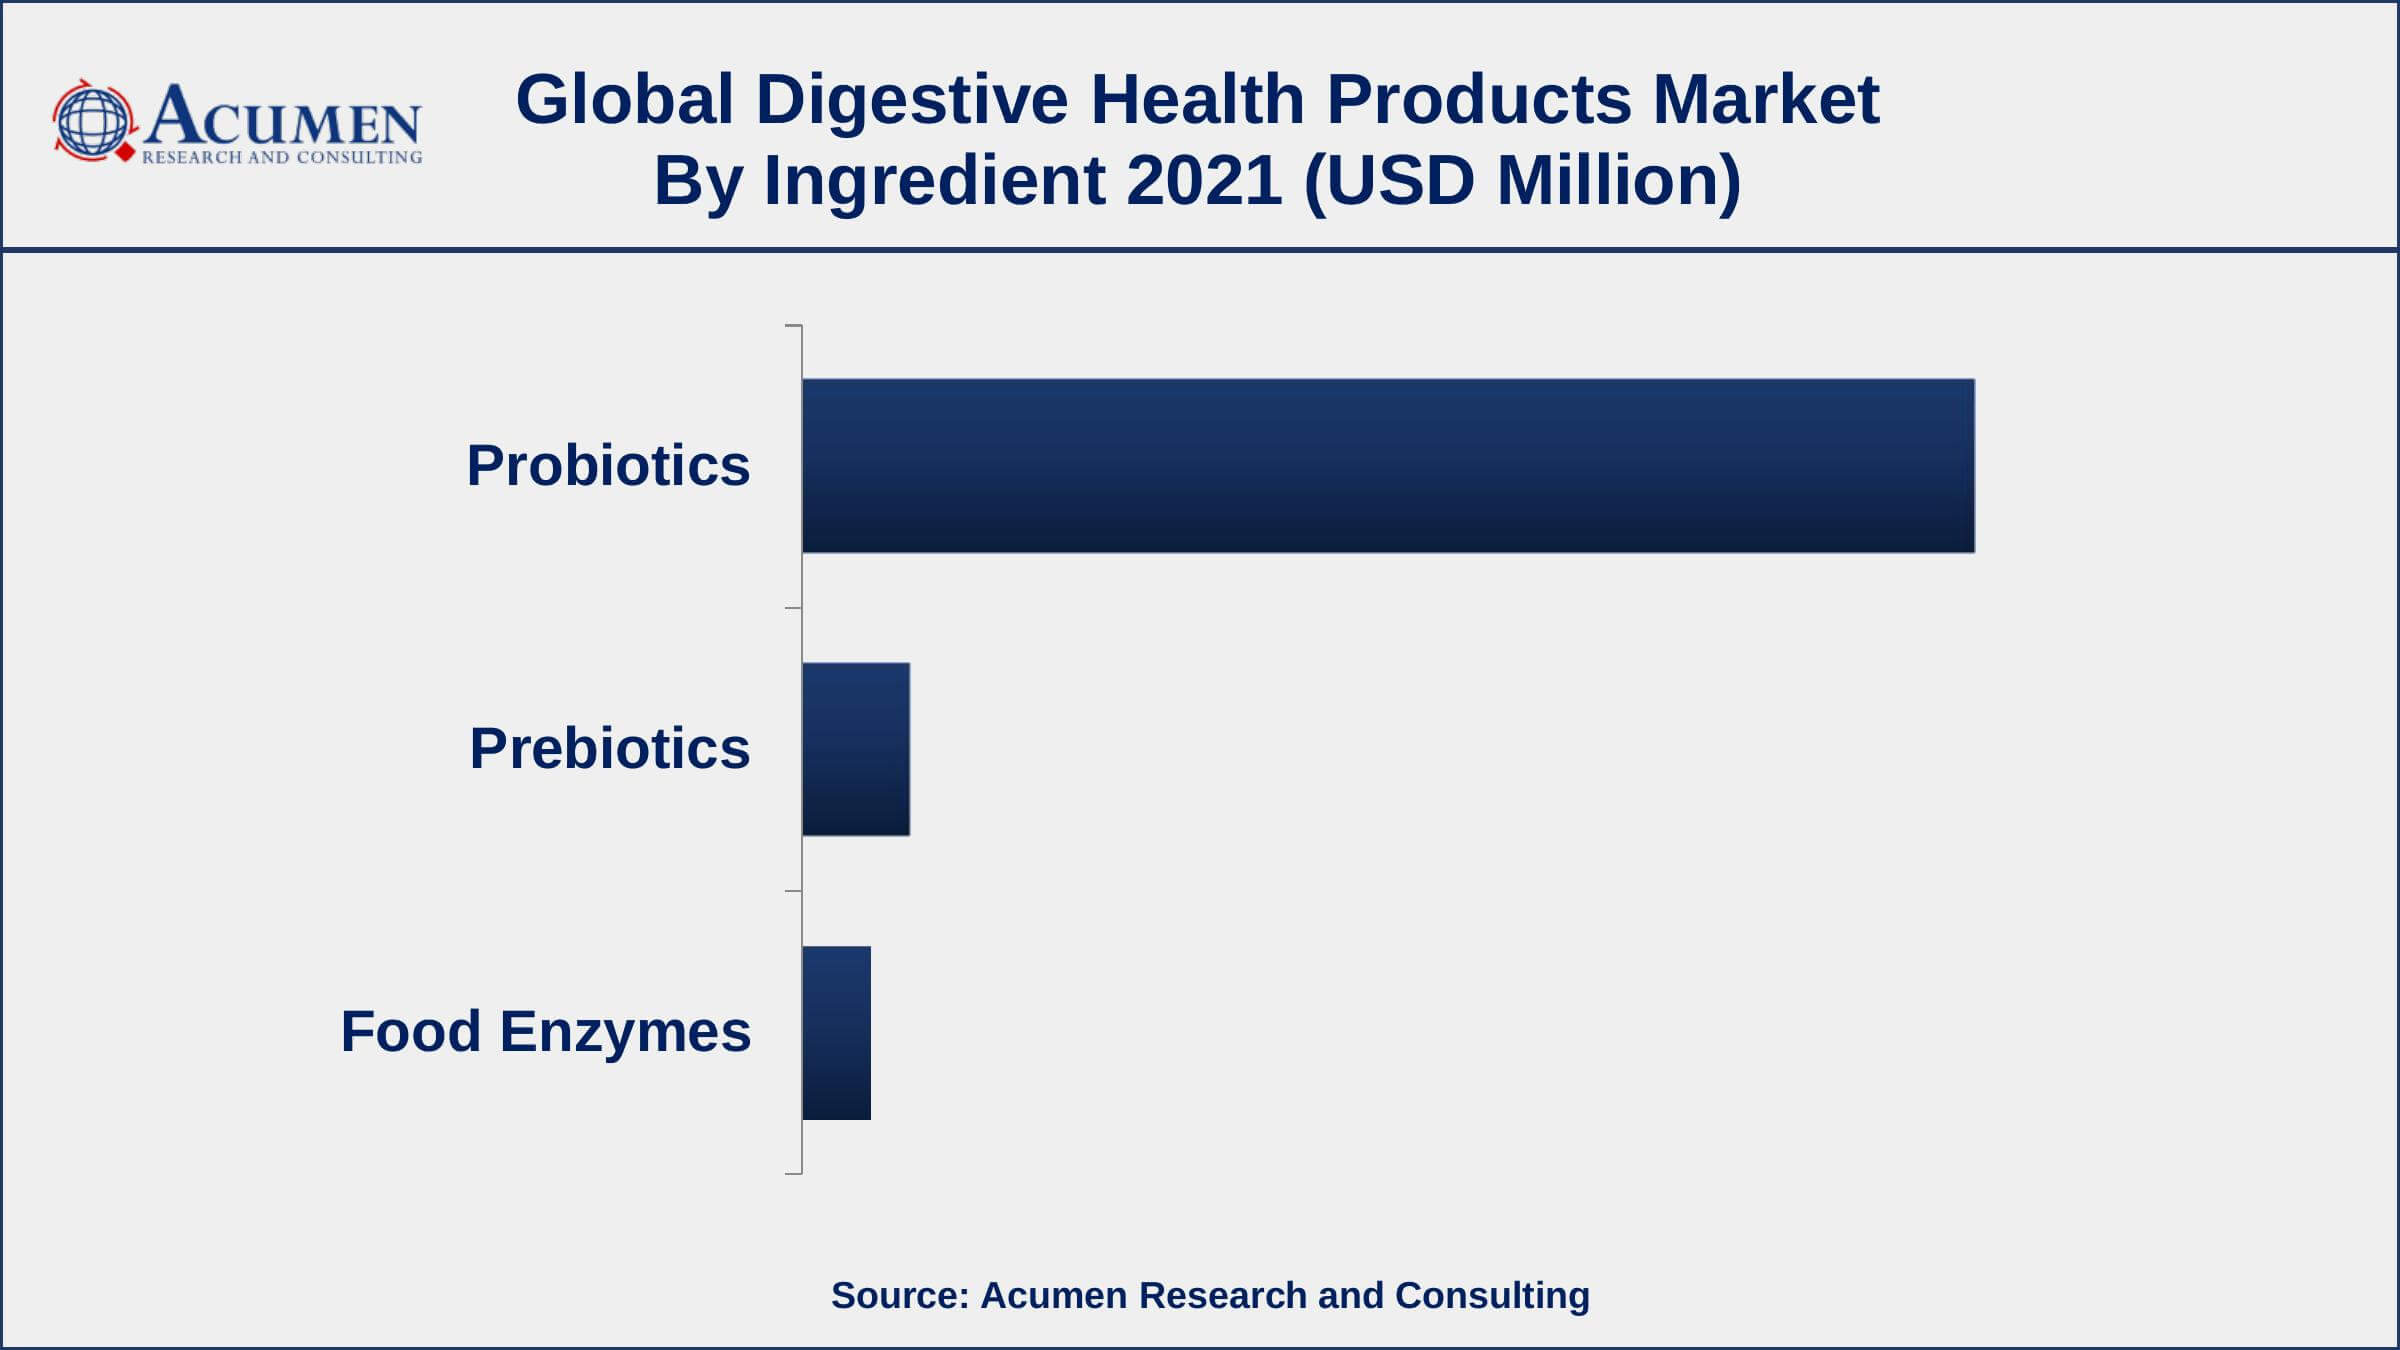 Based on ingredient, probiotics segment accounted for over 86% of the overall market share in 2021